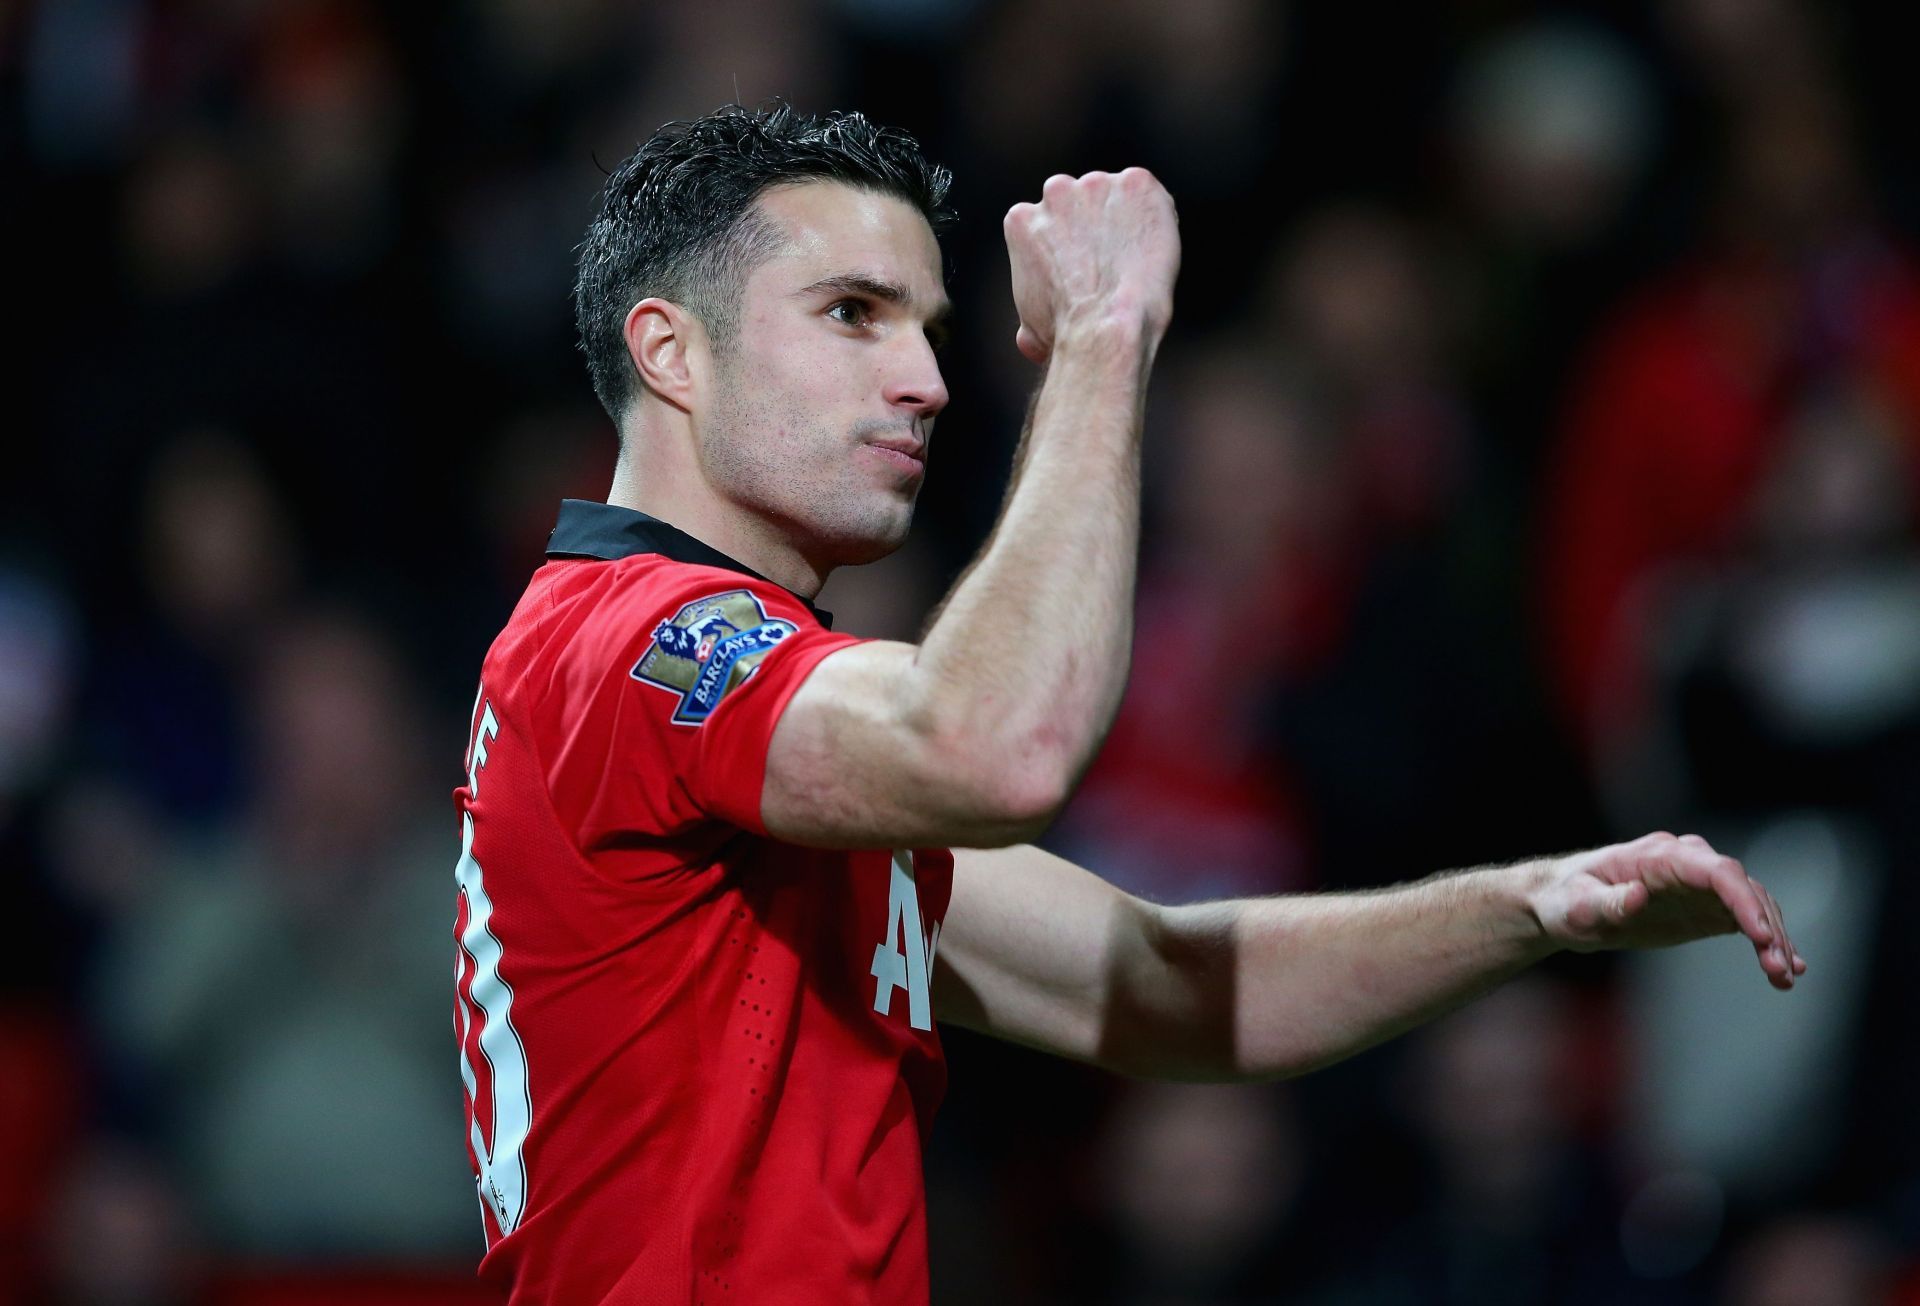 Robin van Persie celebrates a goal for Manchester United.